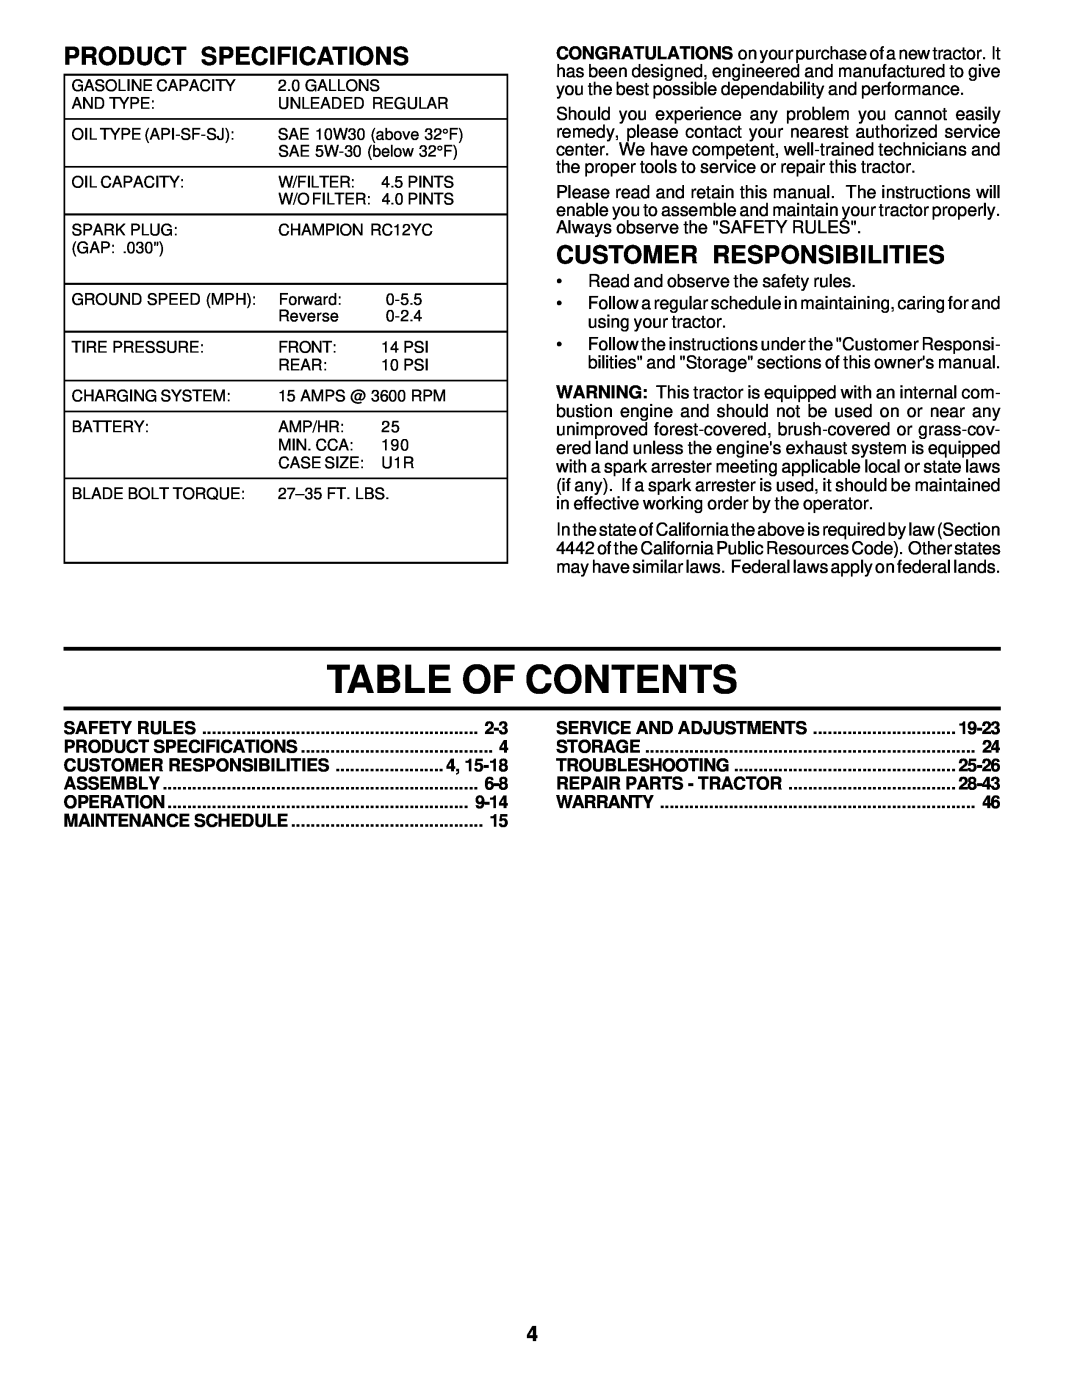 Poulan PRK17H42STB owner manual Table Of Contents, Product Specifications, Customer Responsibilities 